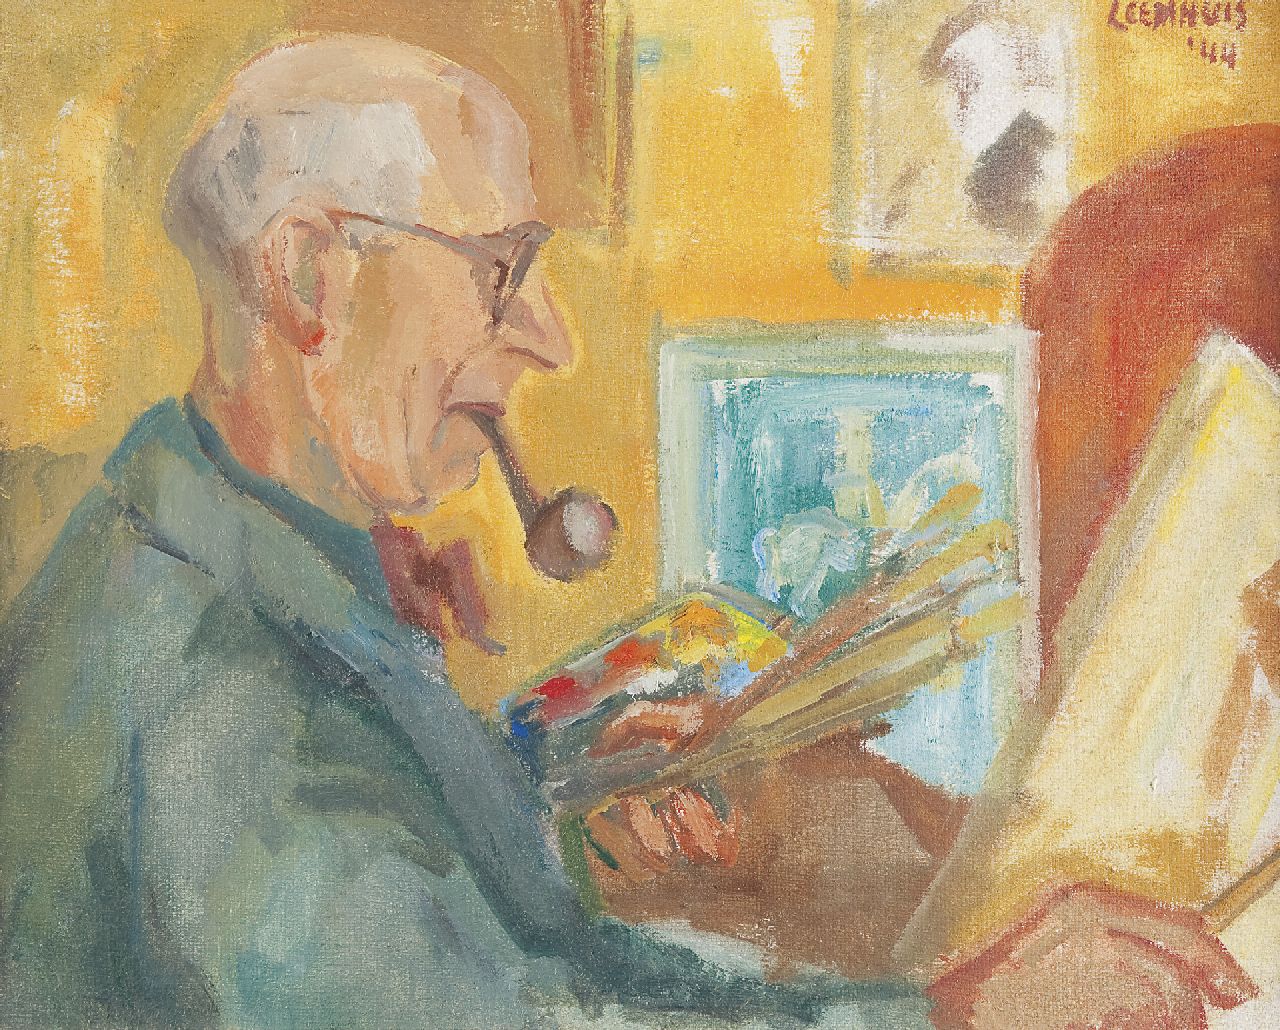 Leemhuis W.H.  | Wiert Hendrik 'Hein' Leemhuis, A painter at work, wax paint on canvas 50.3 x 62.2 cm, signed u.r. and dated '44